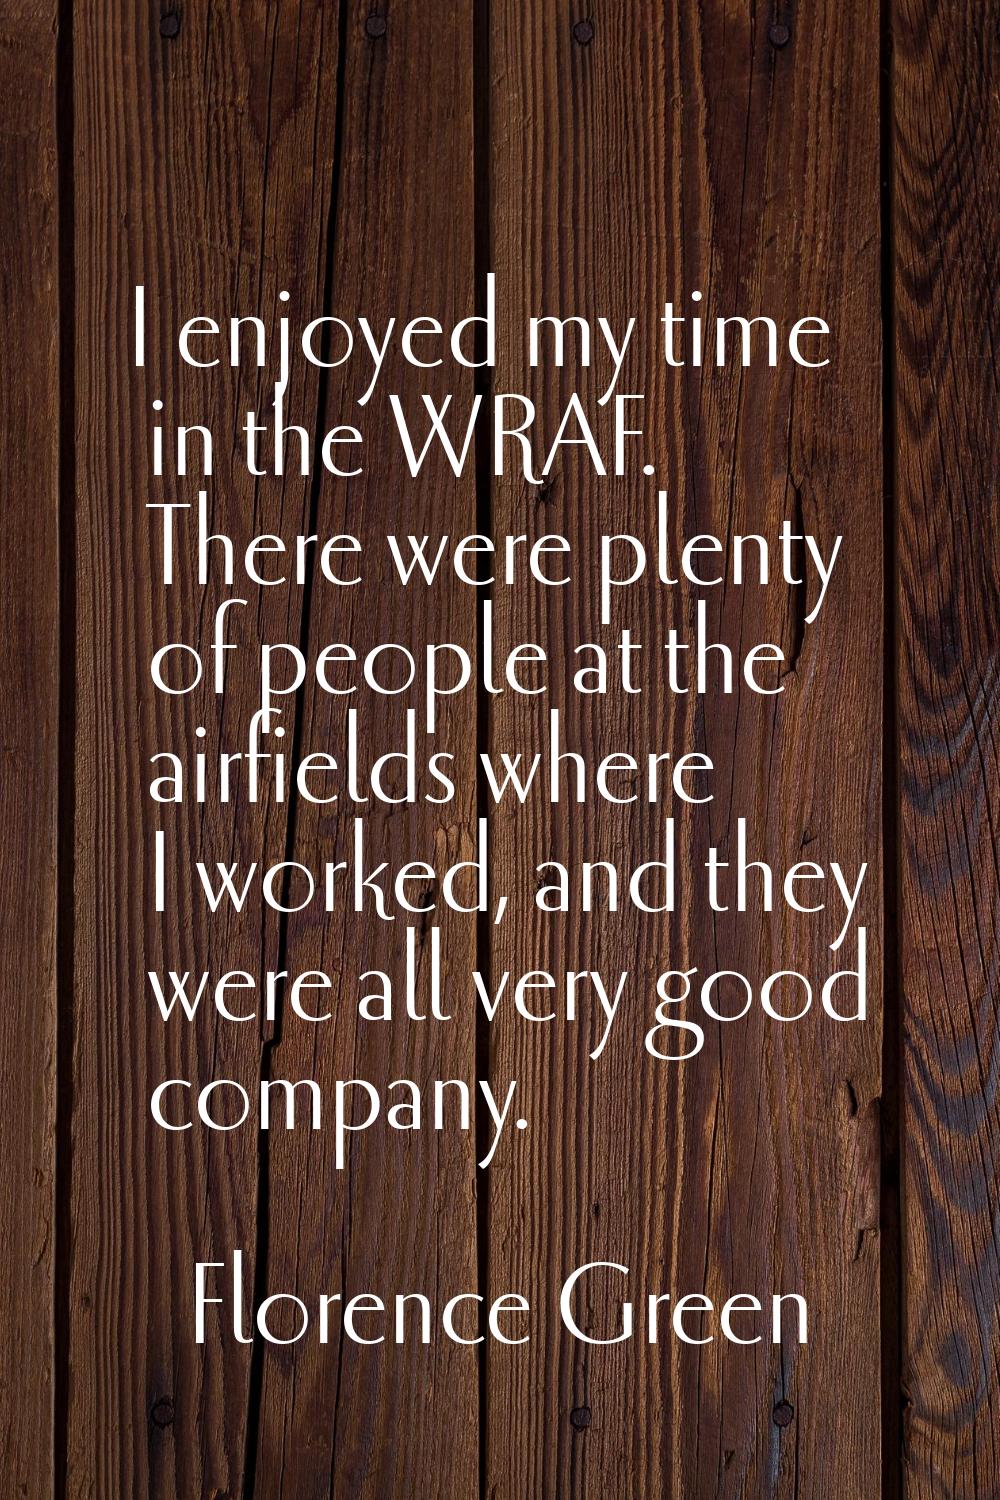 I enjoyed my time in the WRAF. There were plenty of people at the airfields where I worked, and the